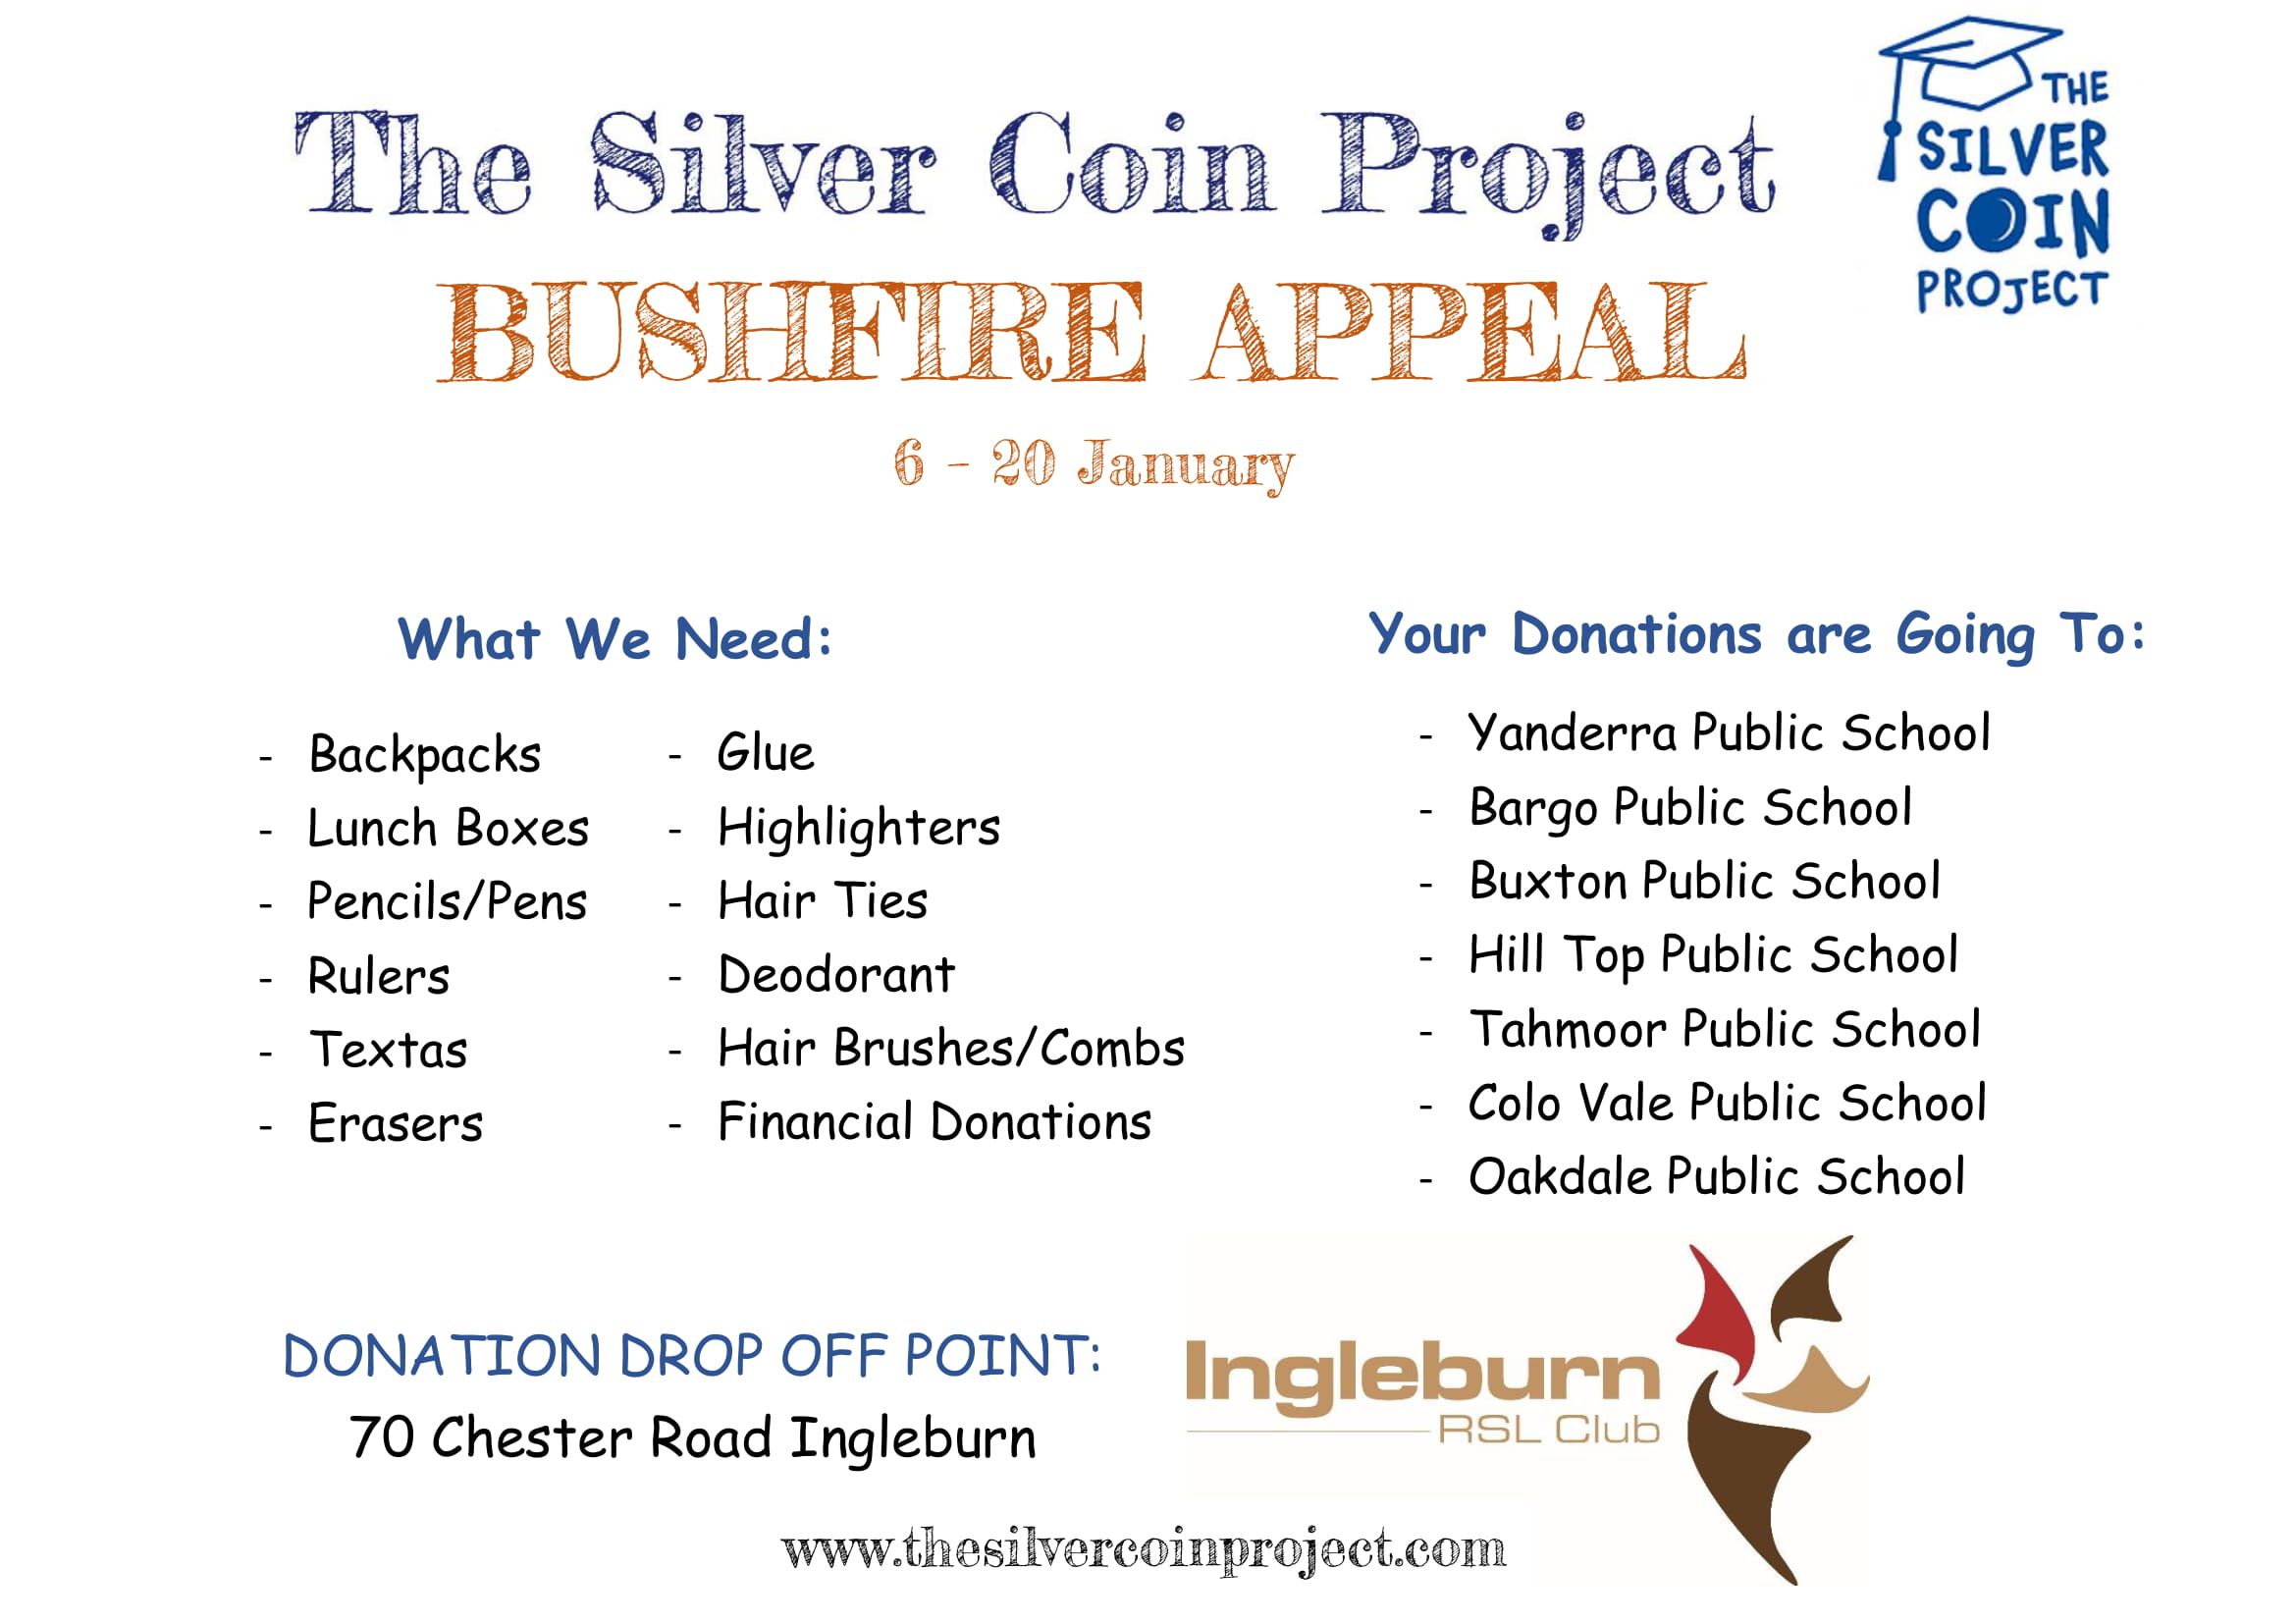 The Silver Coin Project graphic